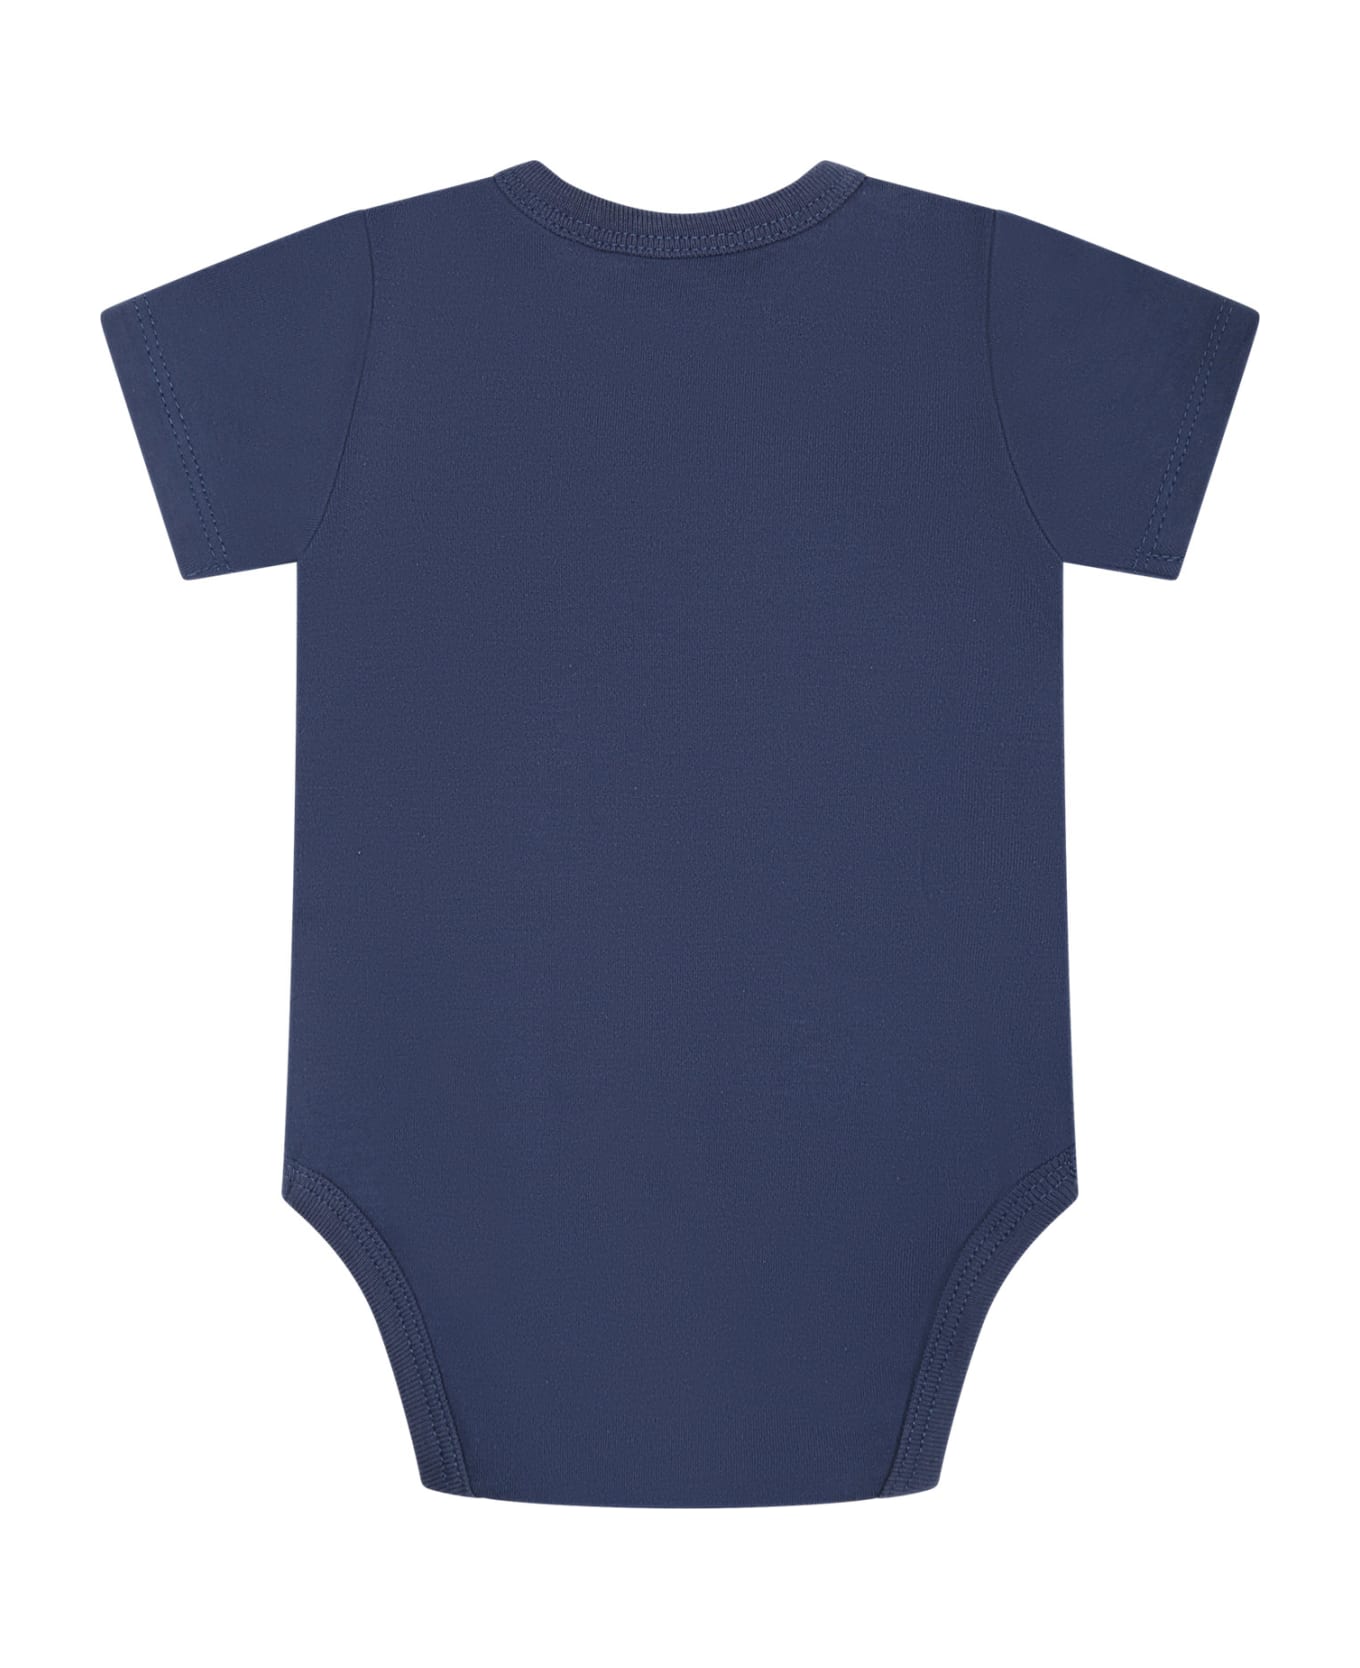 Timberland Blue Bodysuit Set For Baby Boy With Logo - Blue